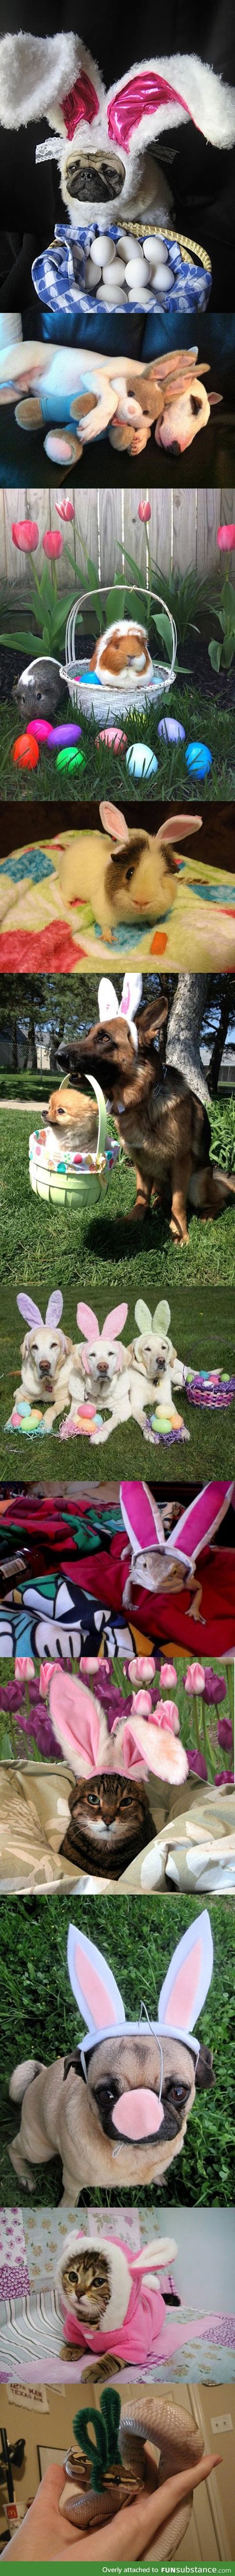 Is it Easter yet?